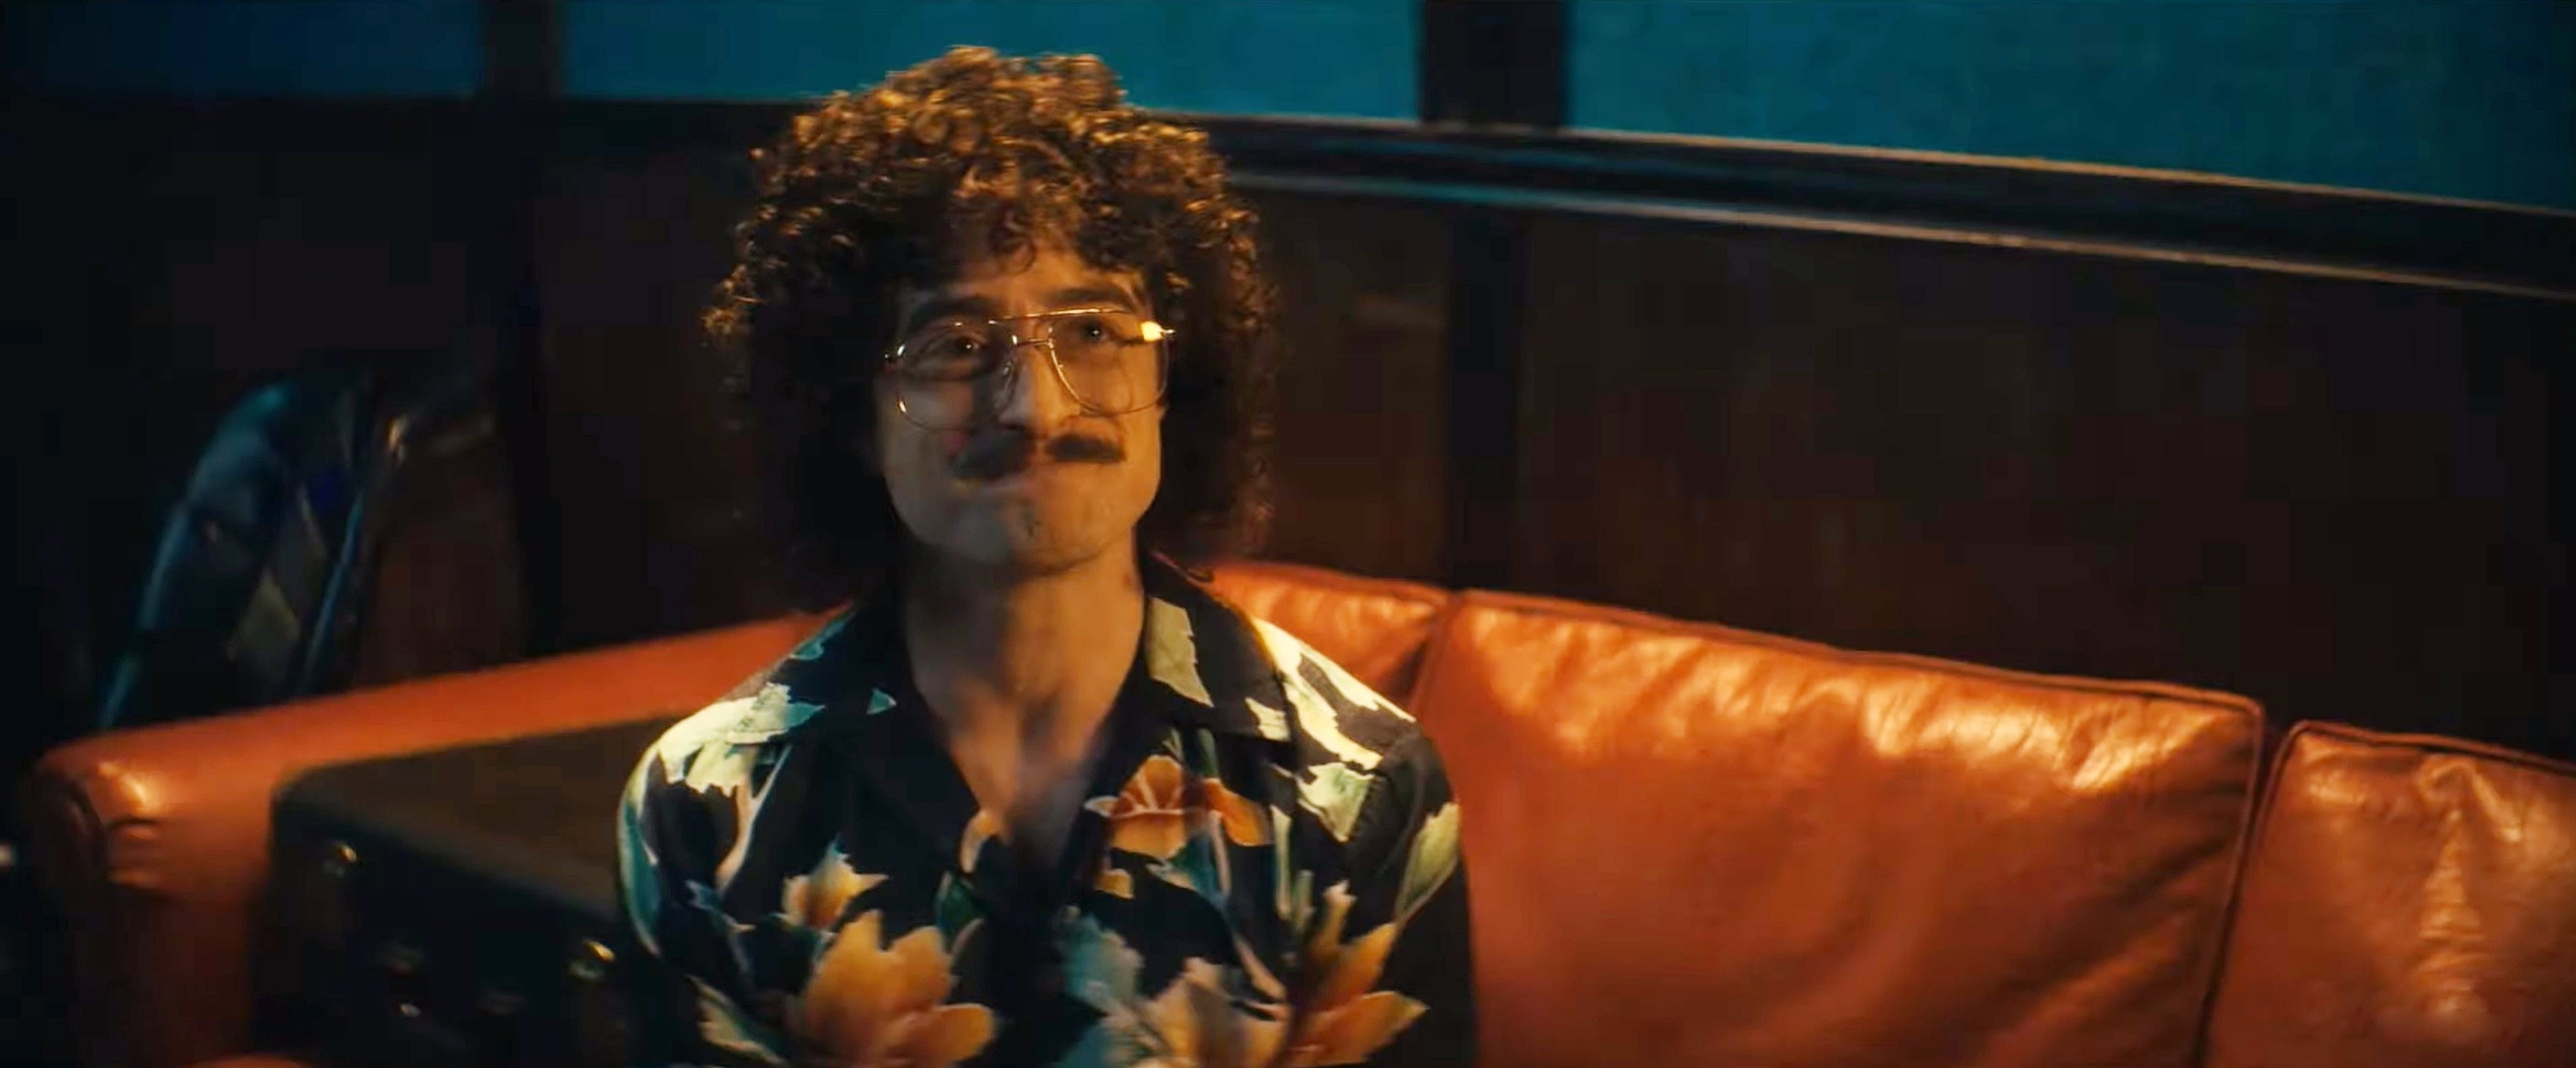 Daniel as Al sitting on a couch and rocking curly hair, a mustache, and large eyeglasses